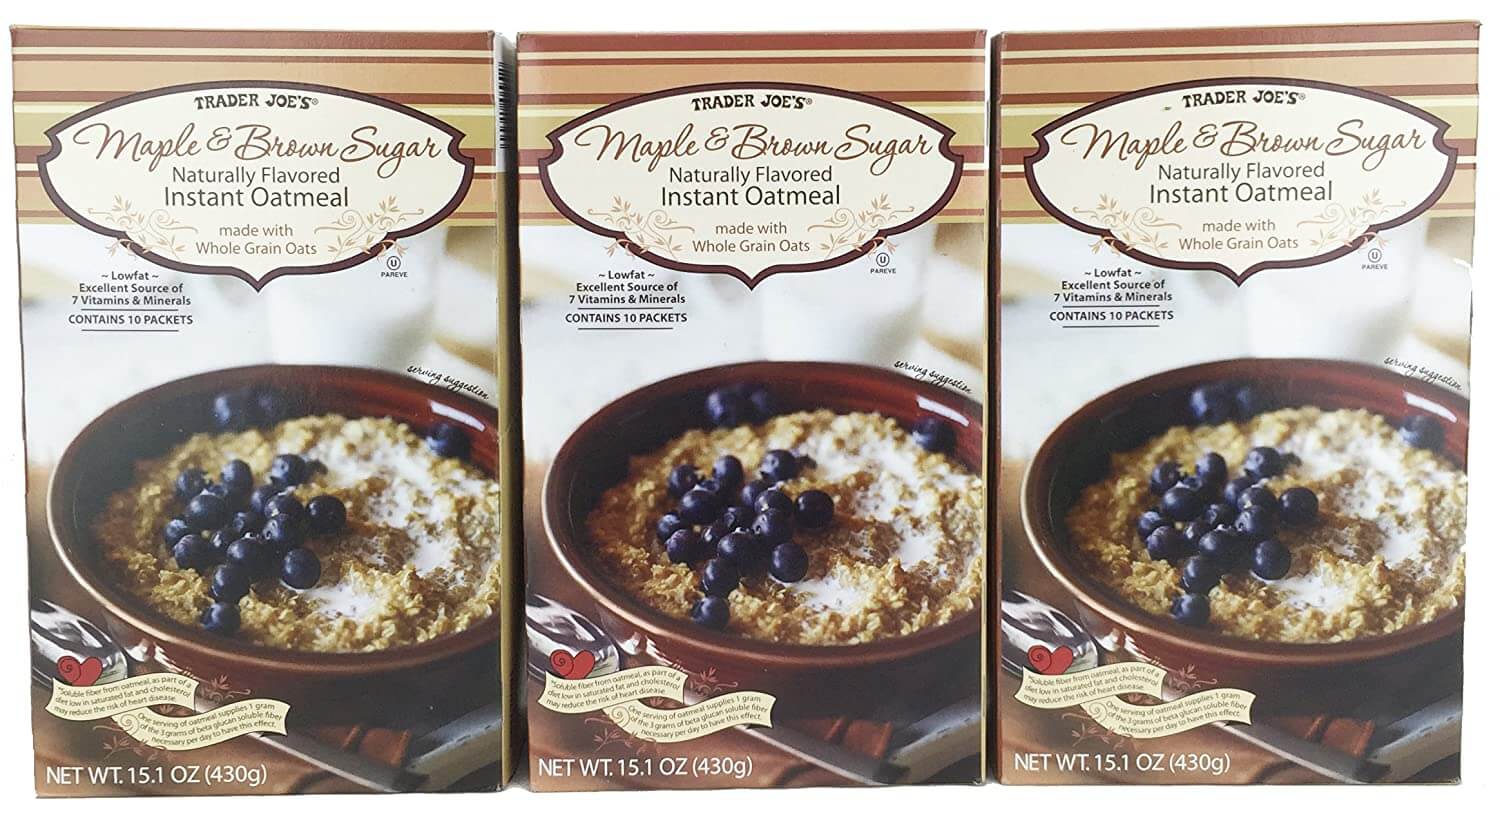 Trader Joes Maple & Brown Sugar Instant Oatmeal